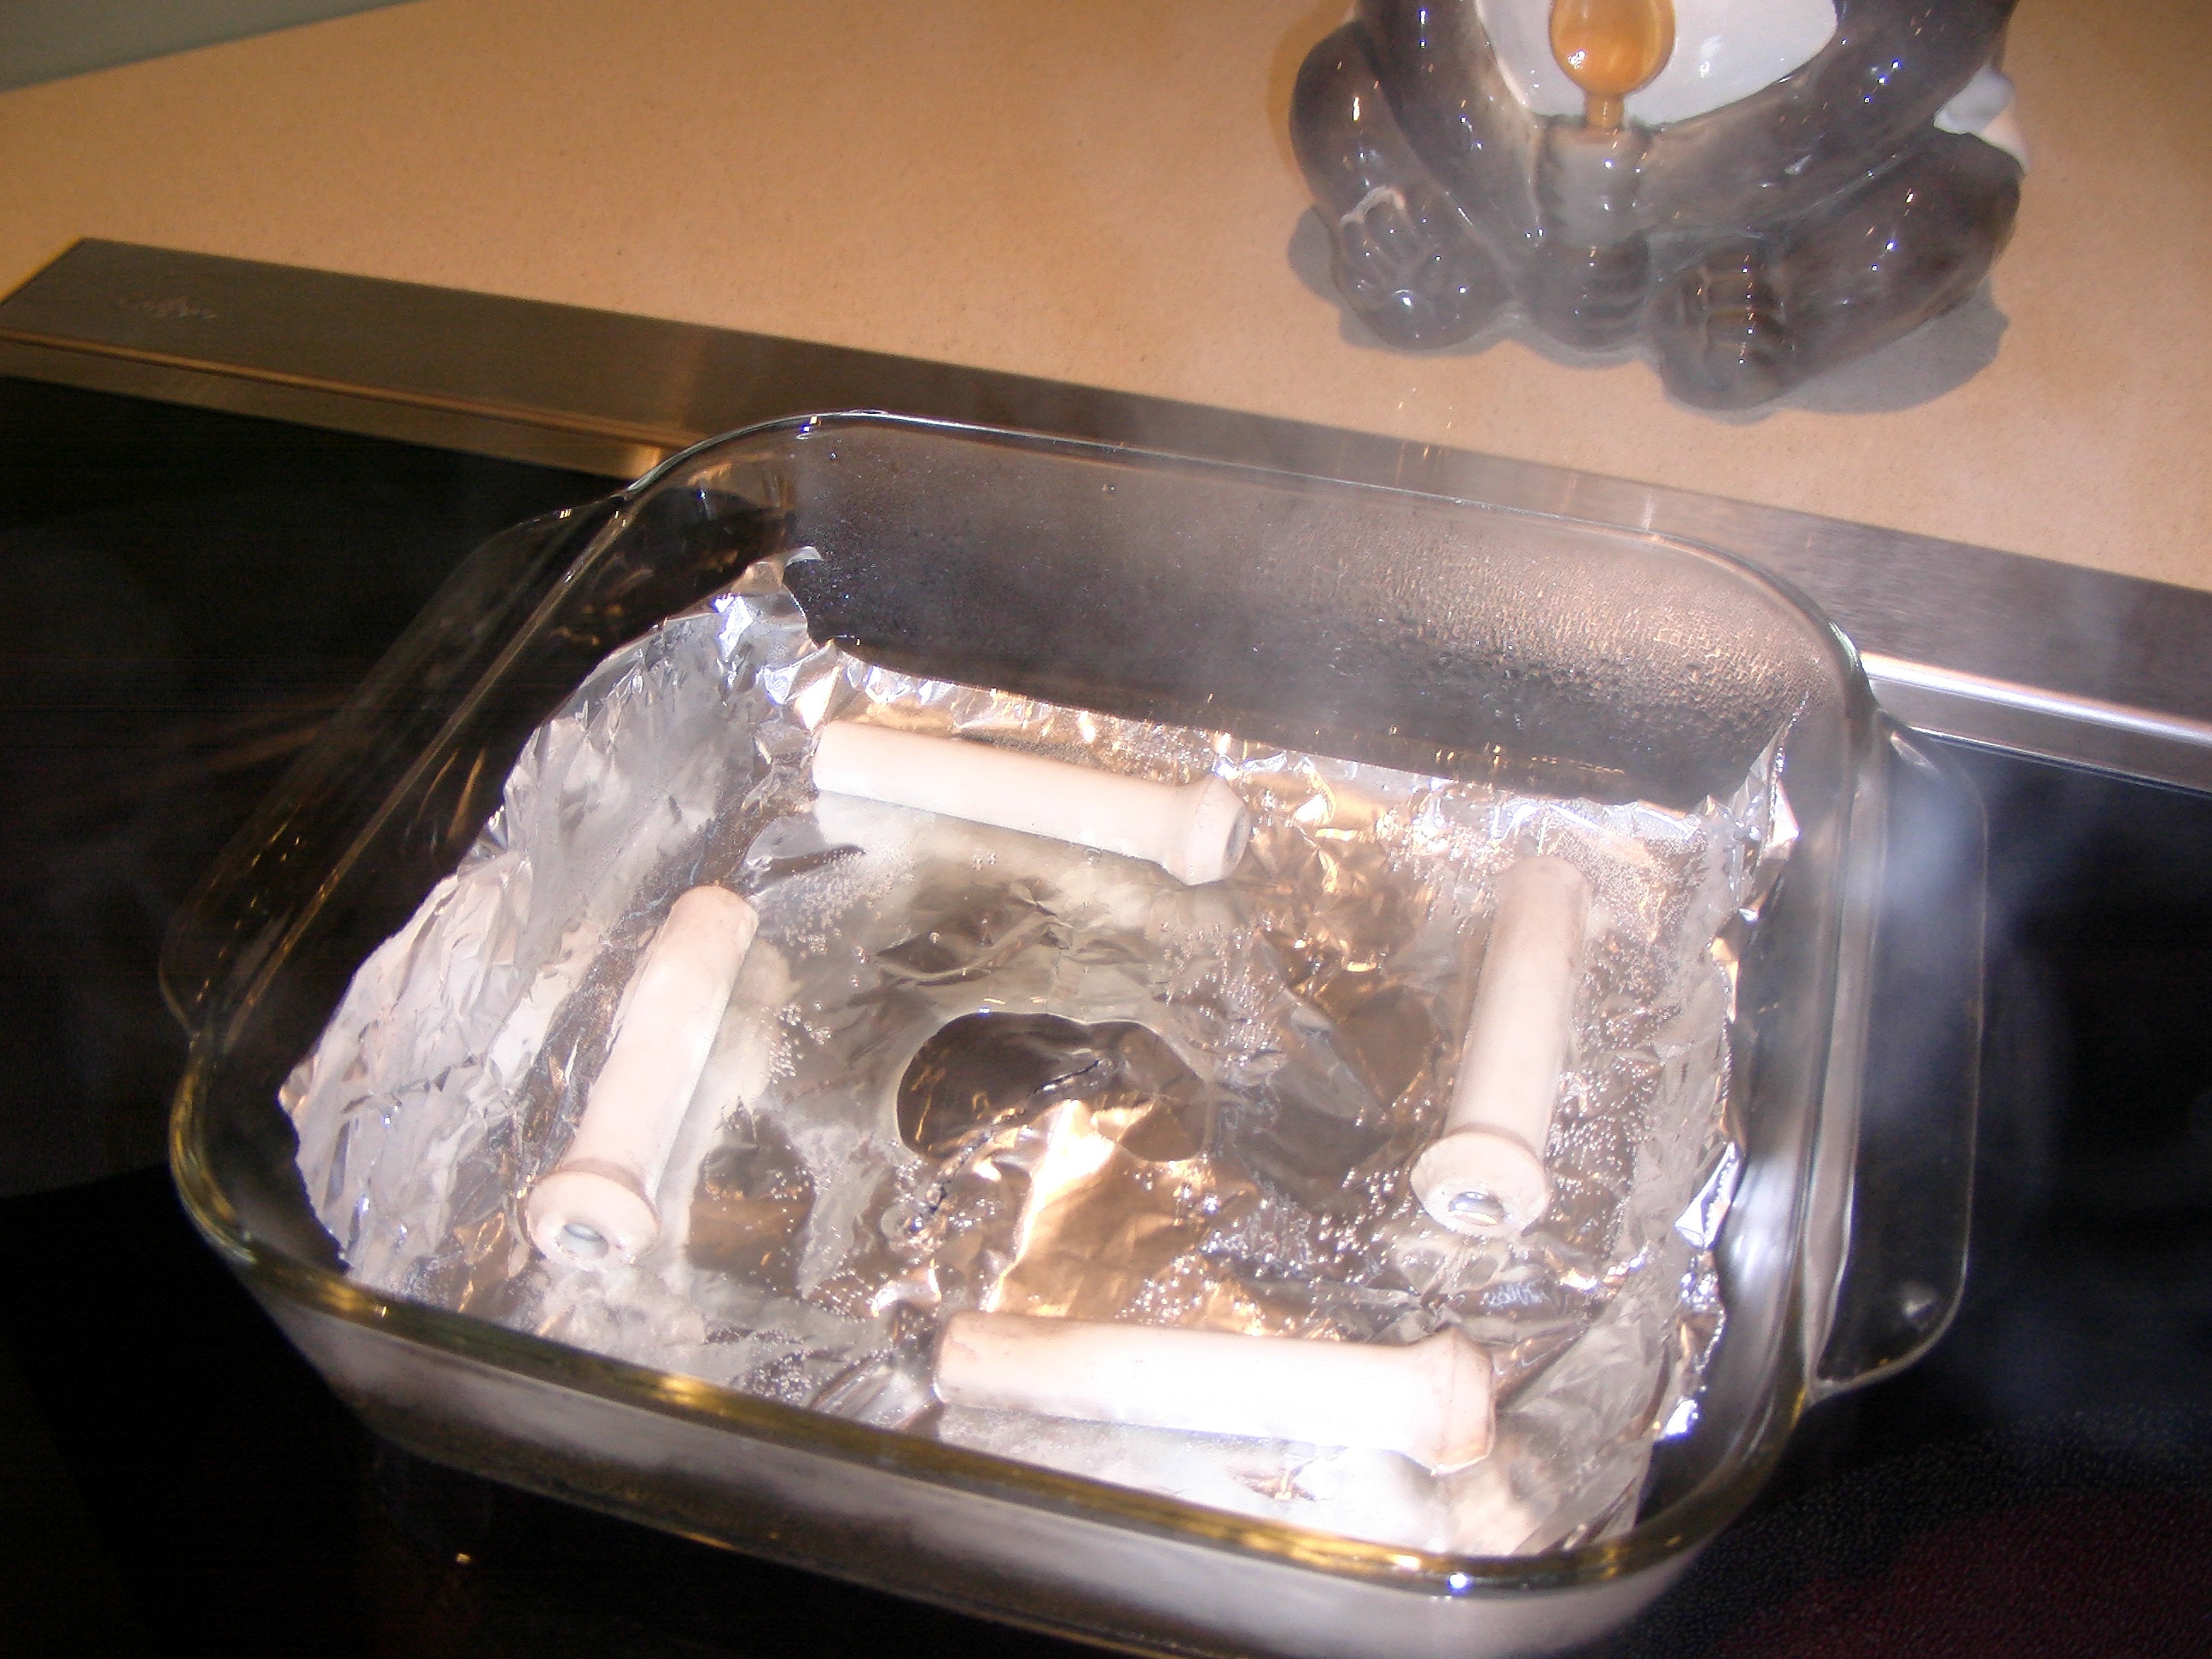 File Foil On Induction Cooktop Jpg Wikimedia Commons